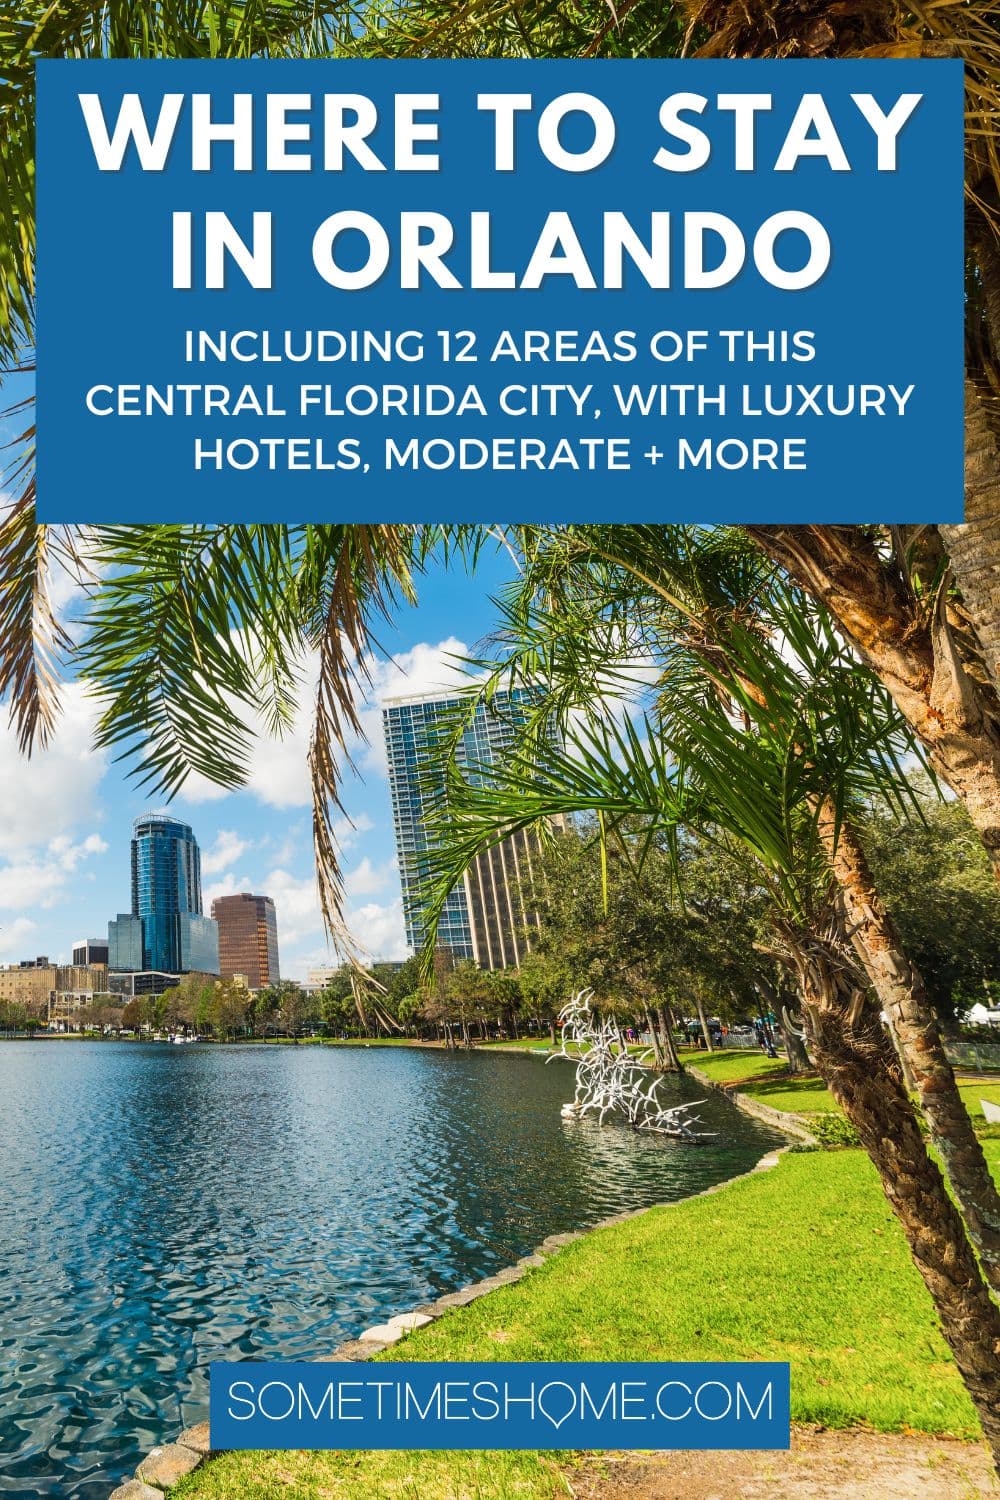 Where to stay in Orlando including 12 Areas of this Central Florida City, from Luxury, to Moderate and more, with a photo of downtown Orlando with a lake and palm trees behind it.